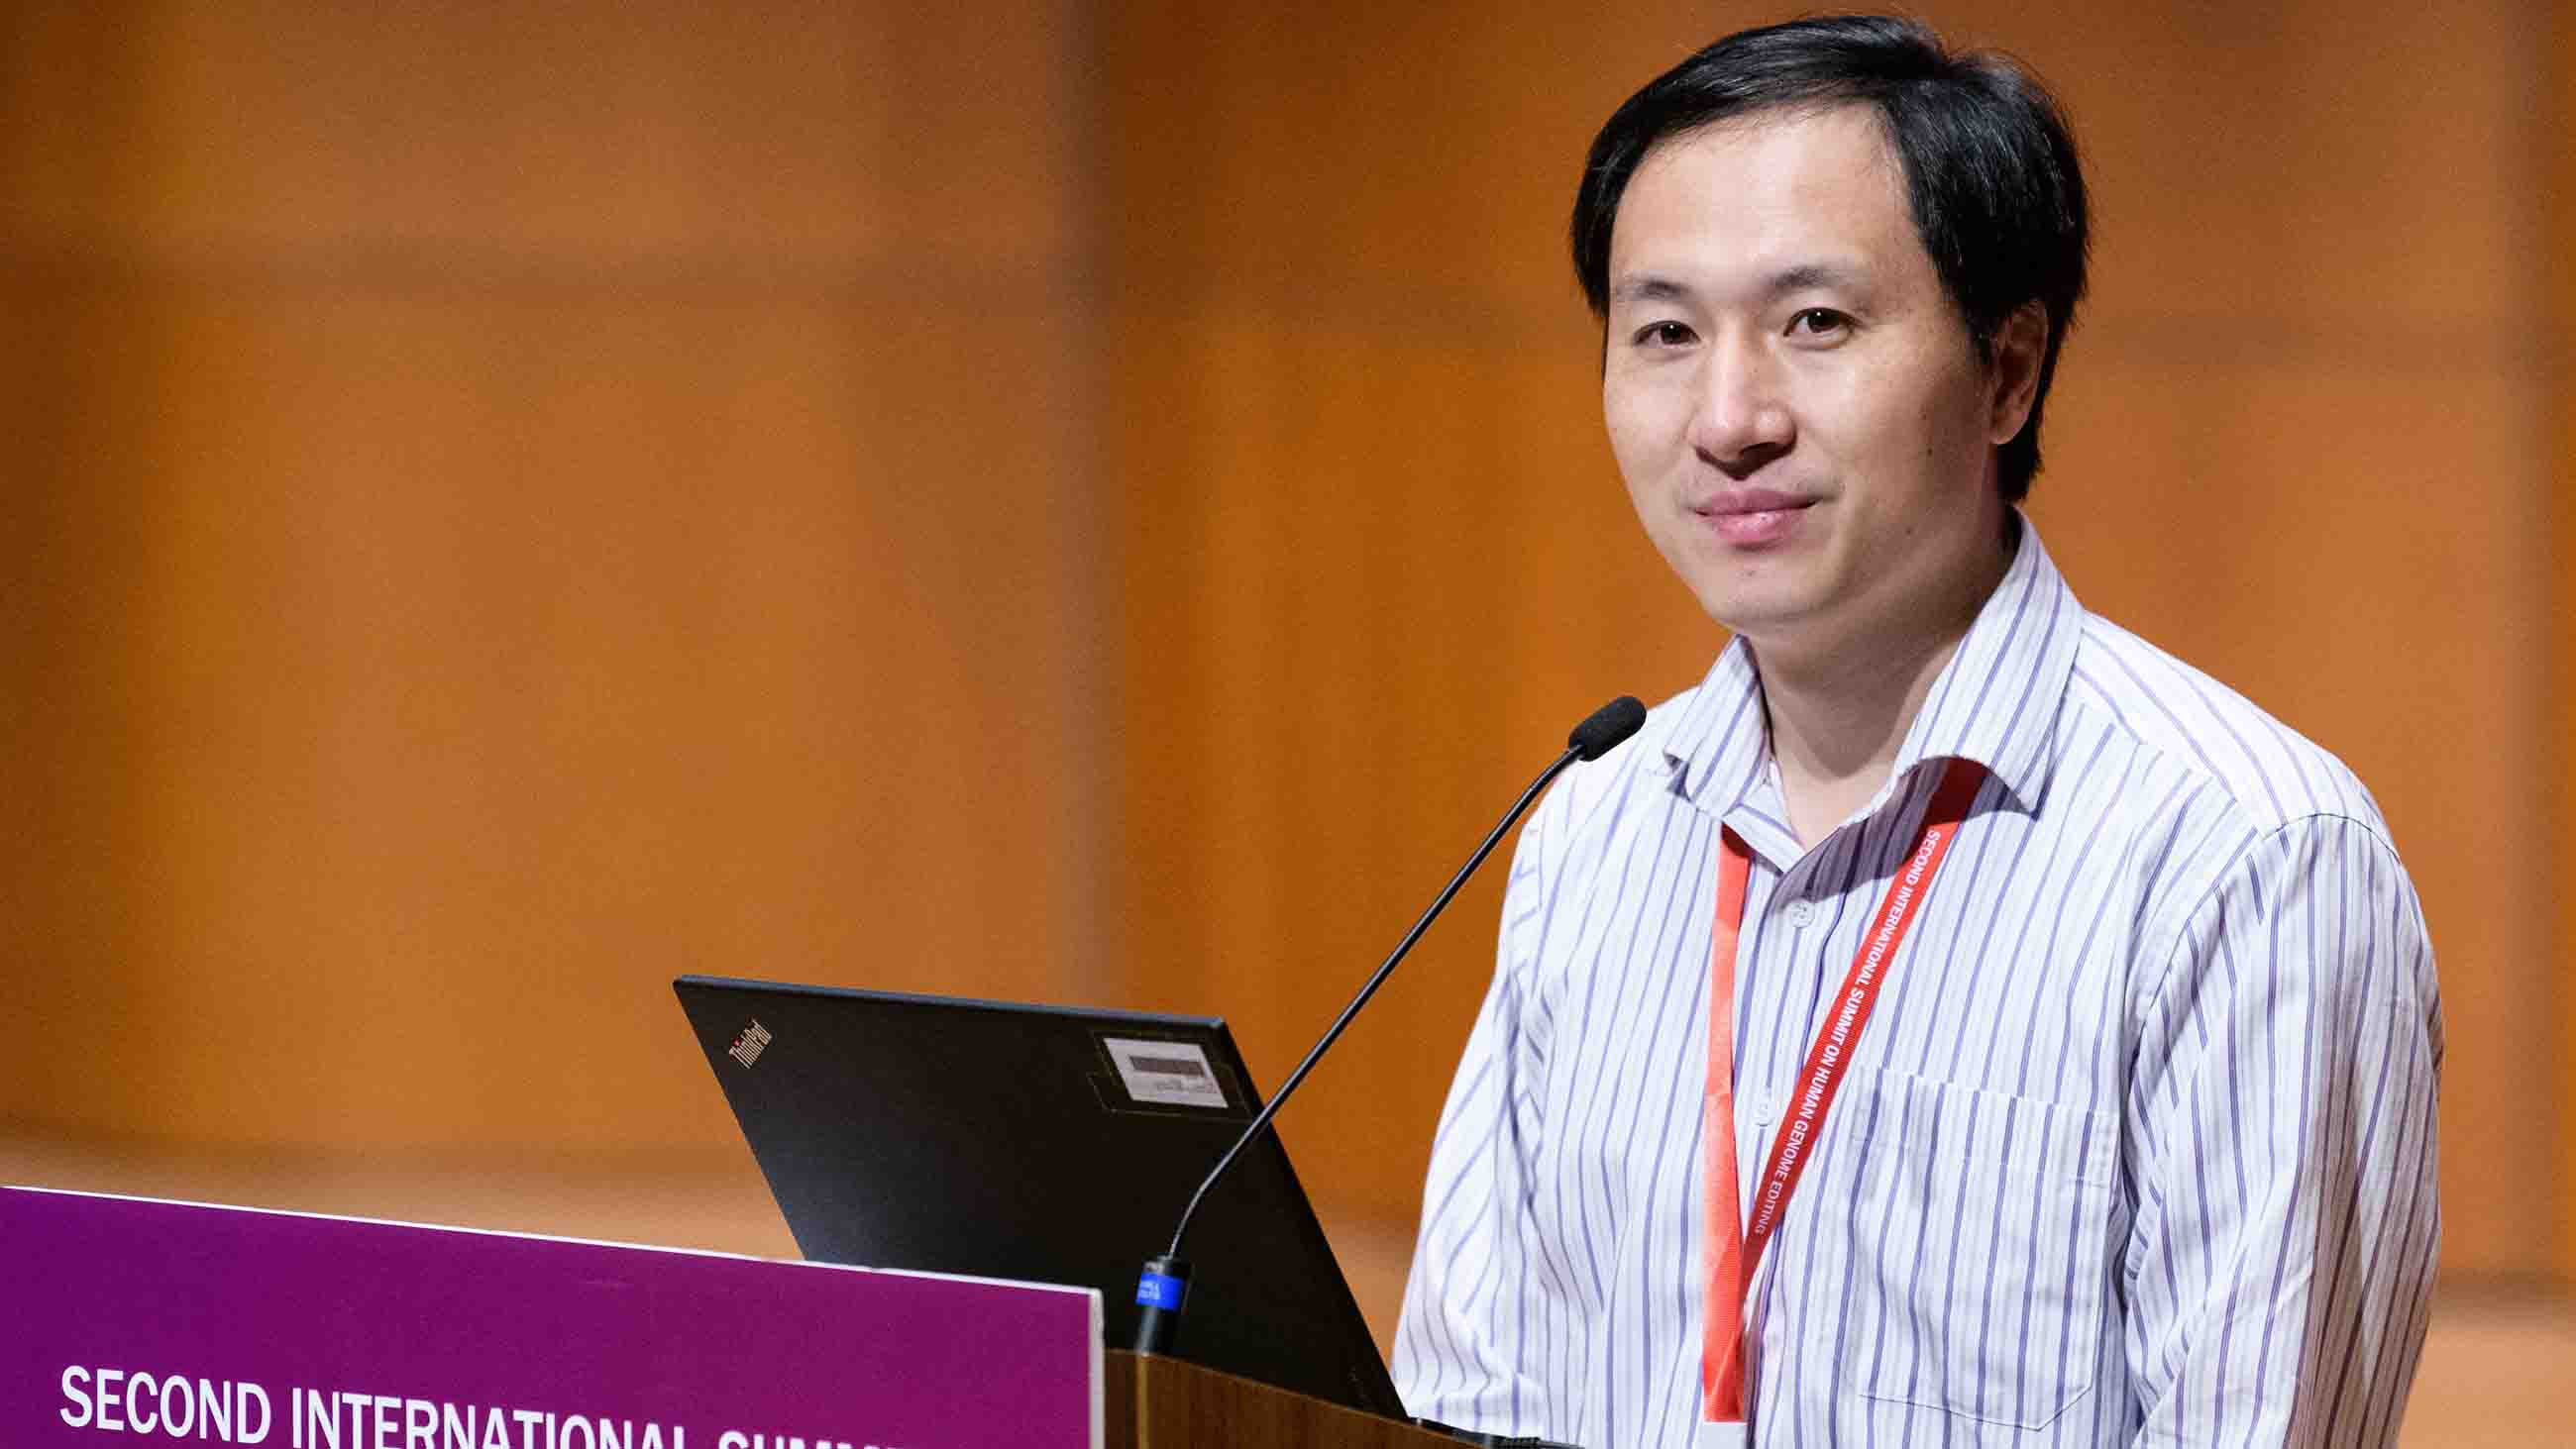 Chinese scientist He Jiankui speaks at the Second International Summit on Human Genome Editing in Hong Kong on November 28, 2018.